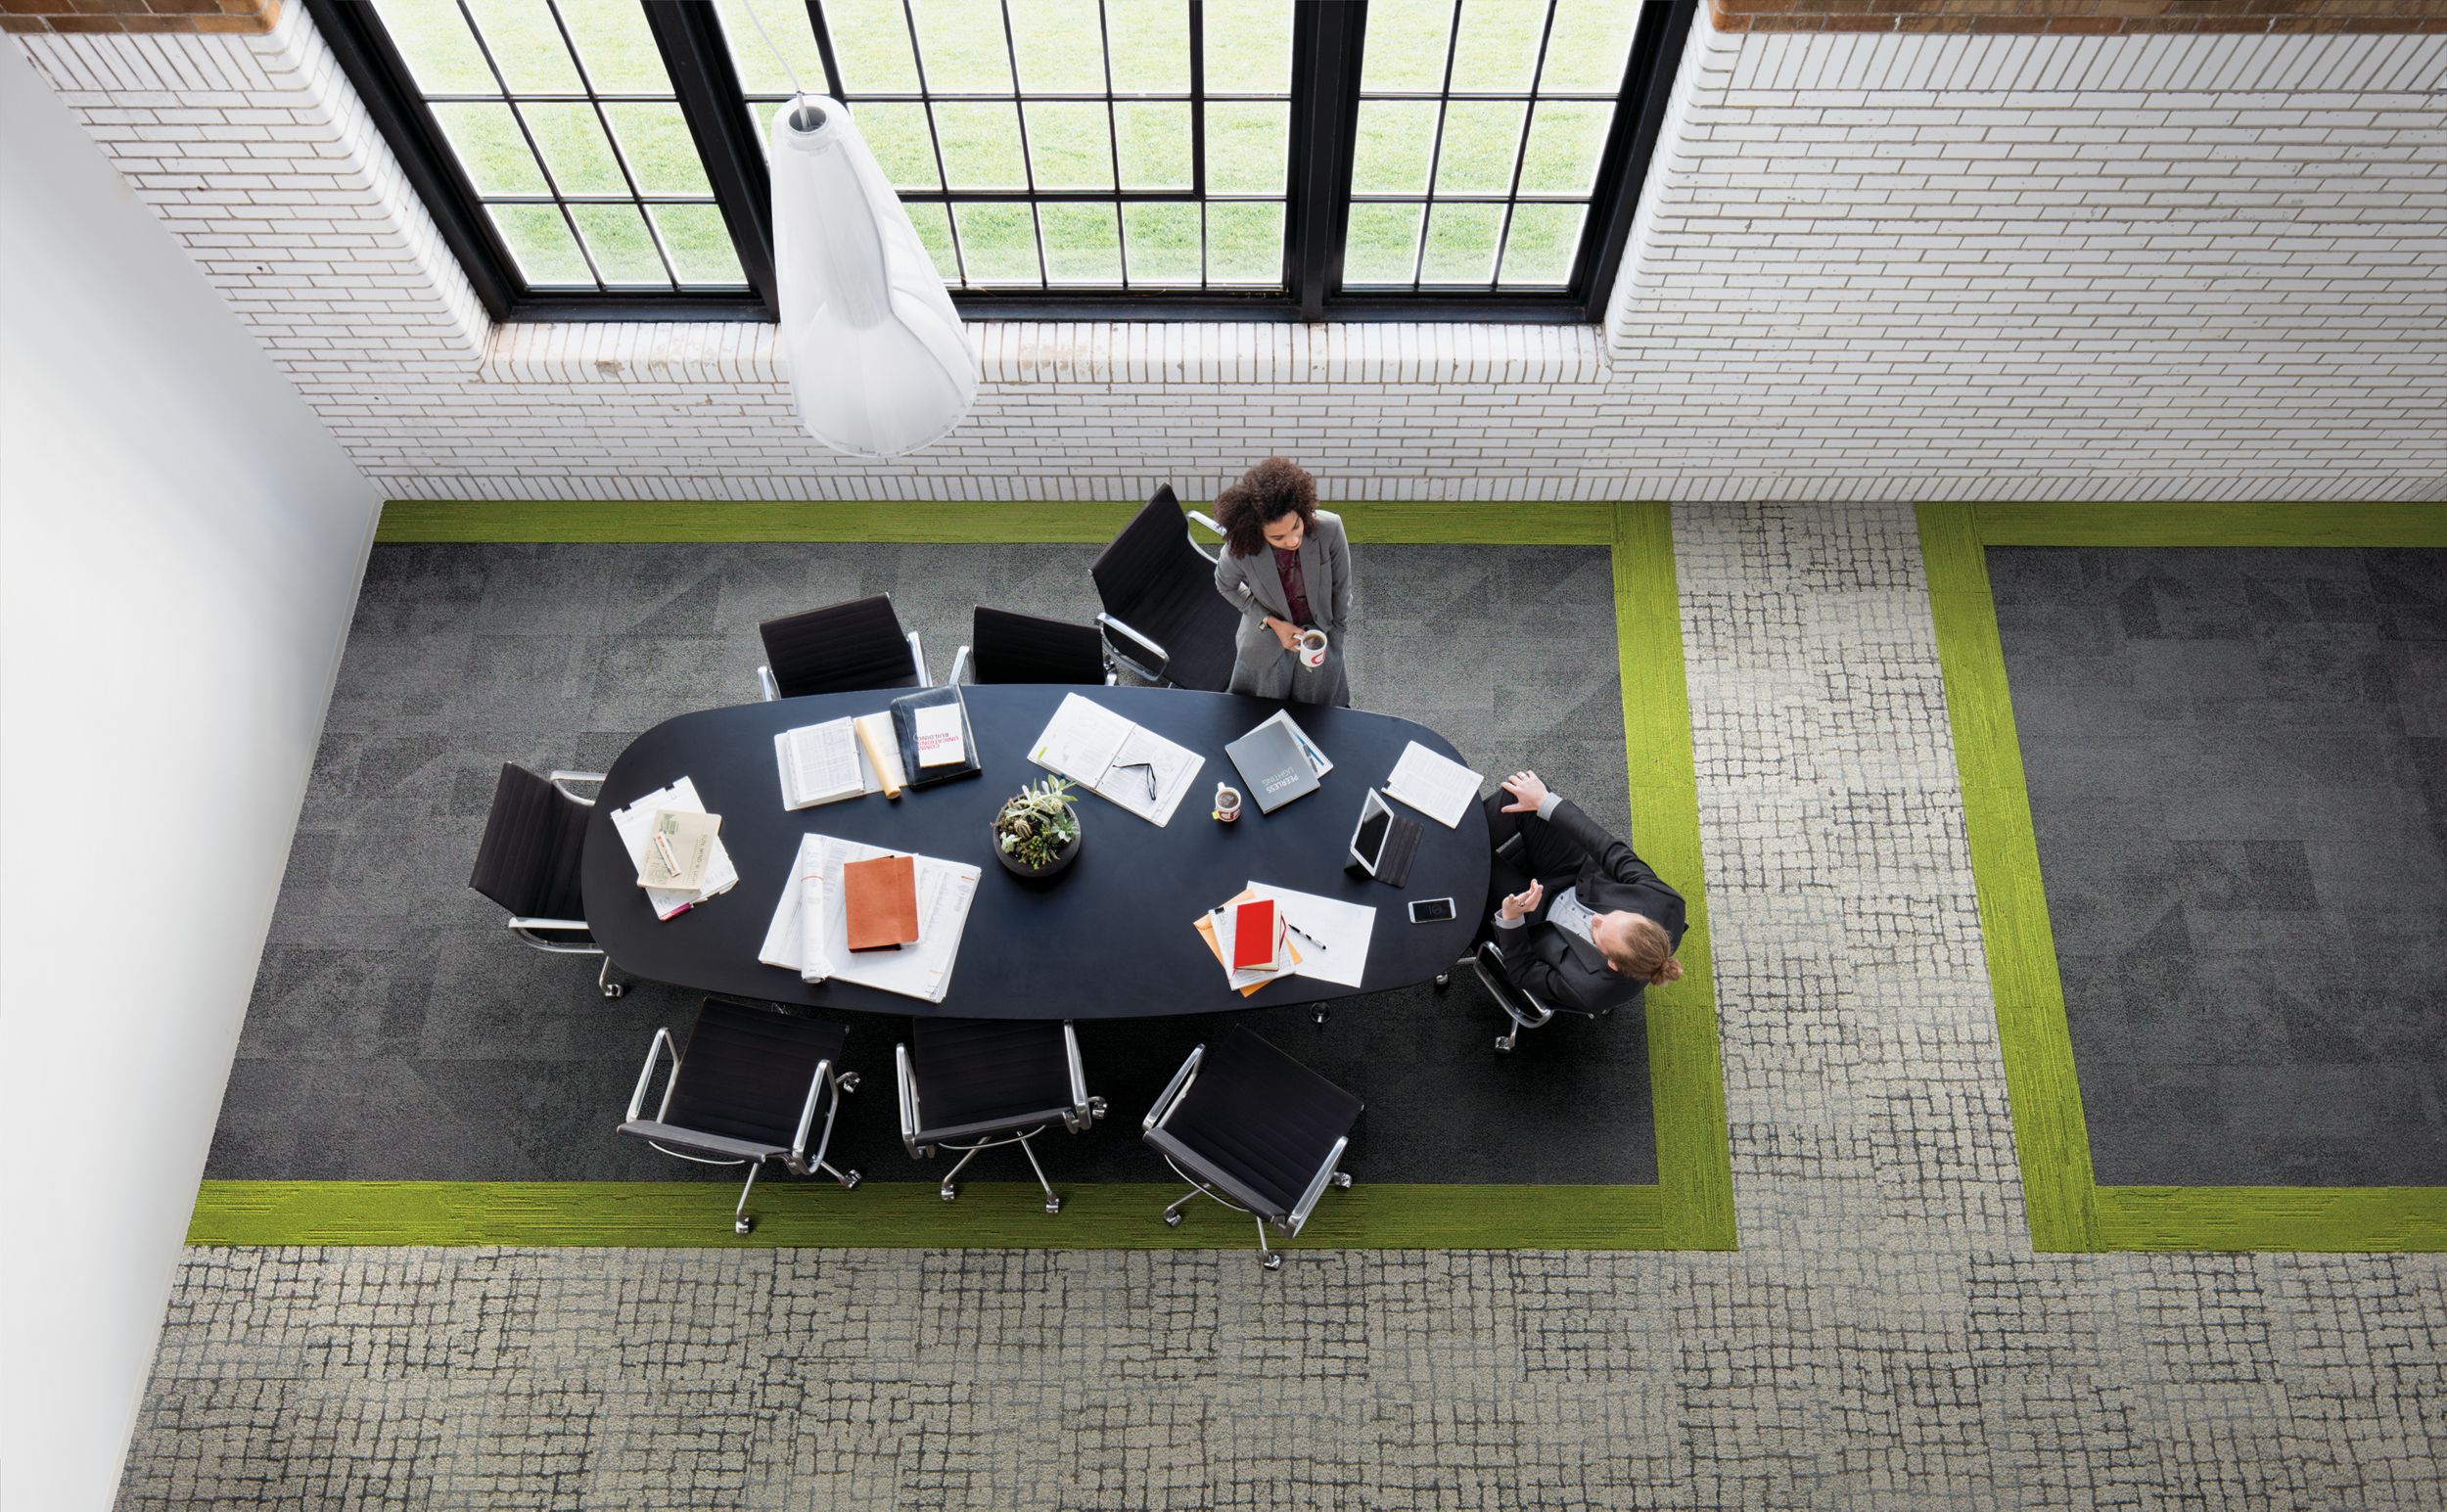 Interface Paver and Sett in Stone carpet tile with UR501 plank carpet tile in overhead view of meeting area with man and women conversating afbeeldingnummer 6